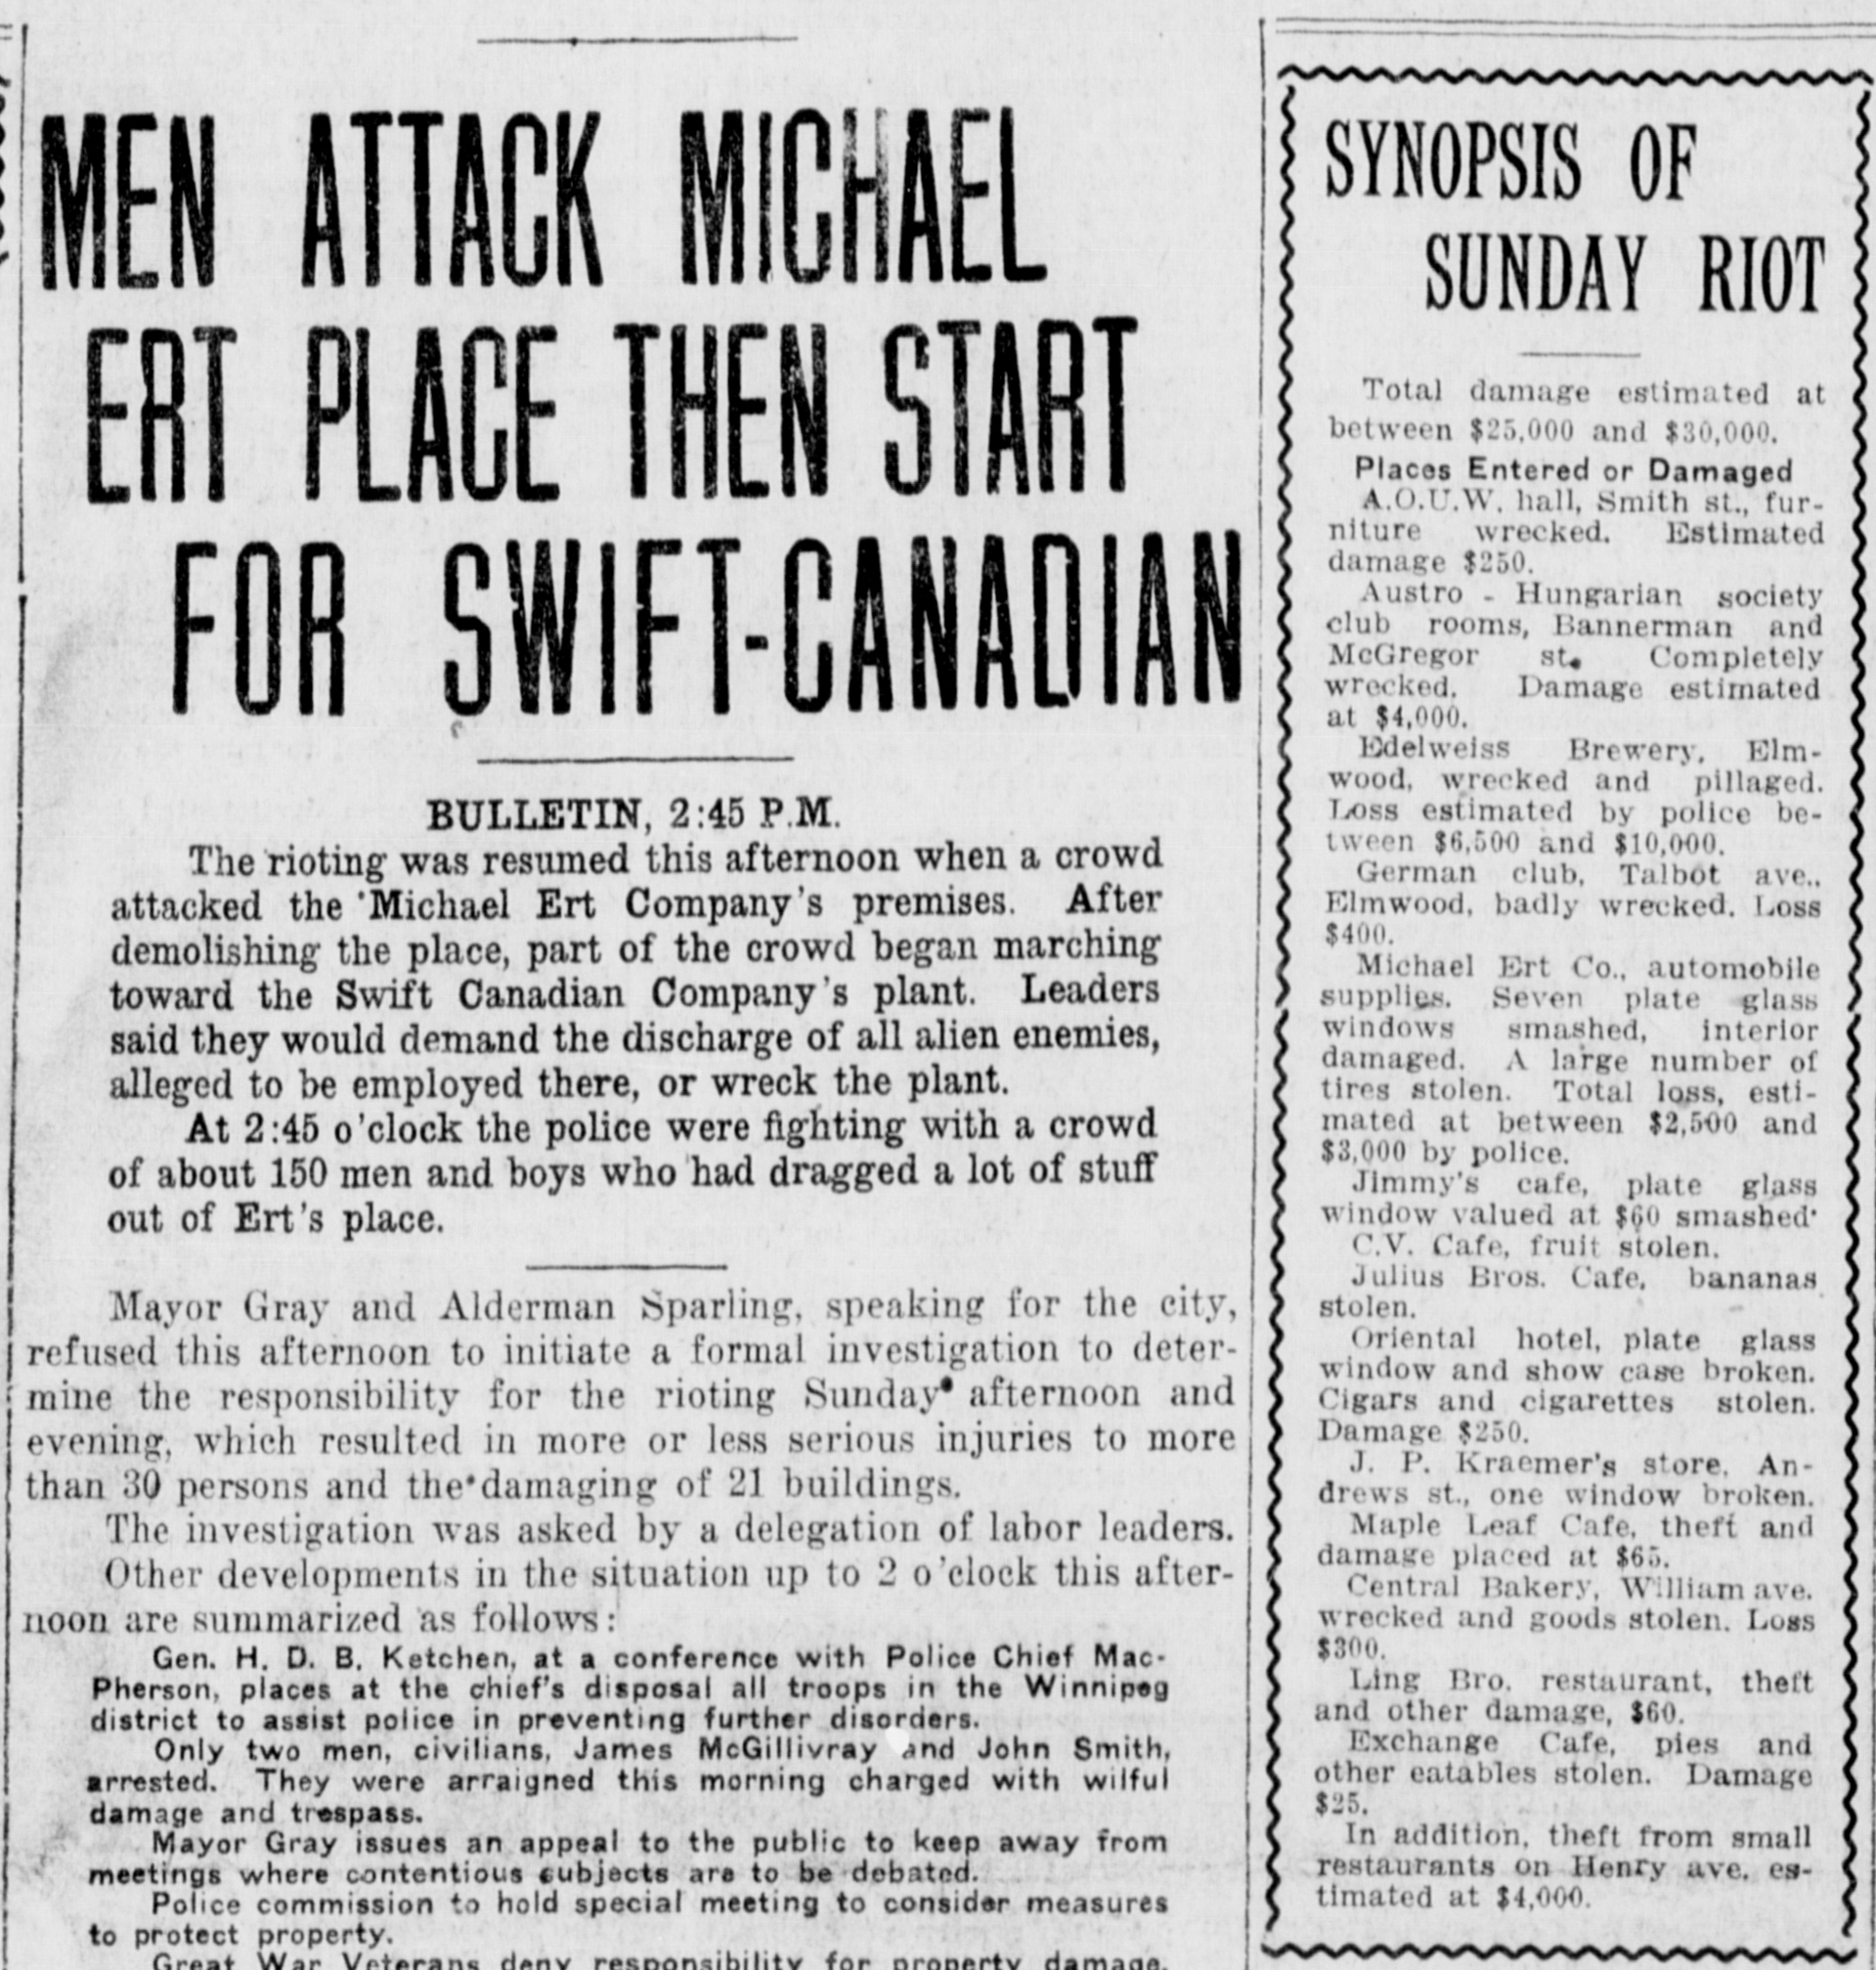 A summary of the January 26, 1919 riots against alien owned or sympathic establishments. Winnipeg Tribune, January 27, 1919.